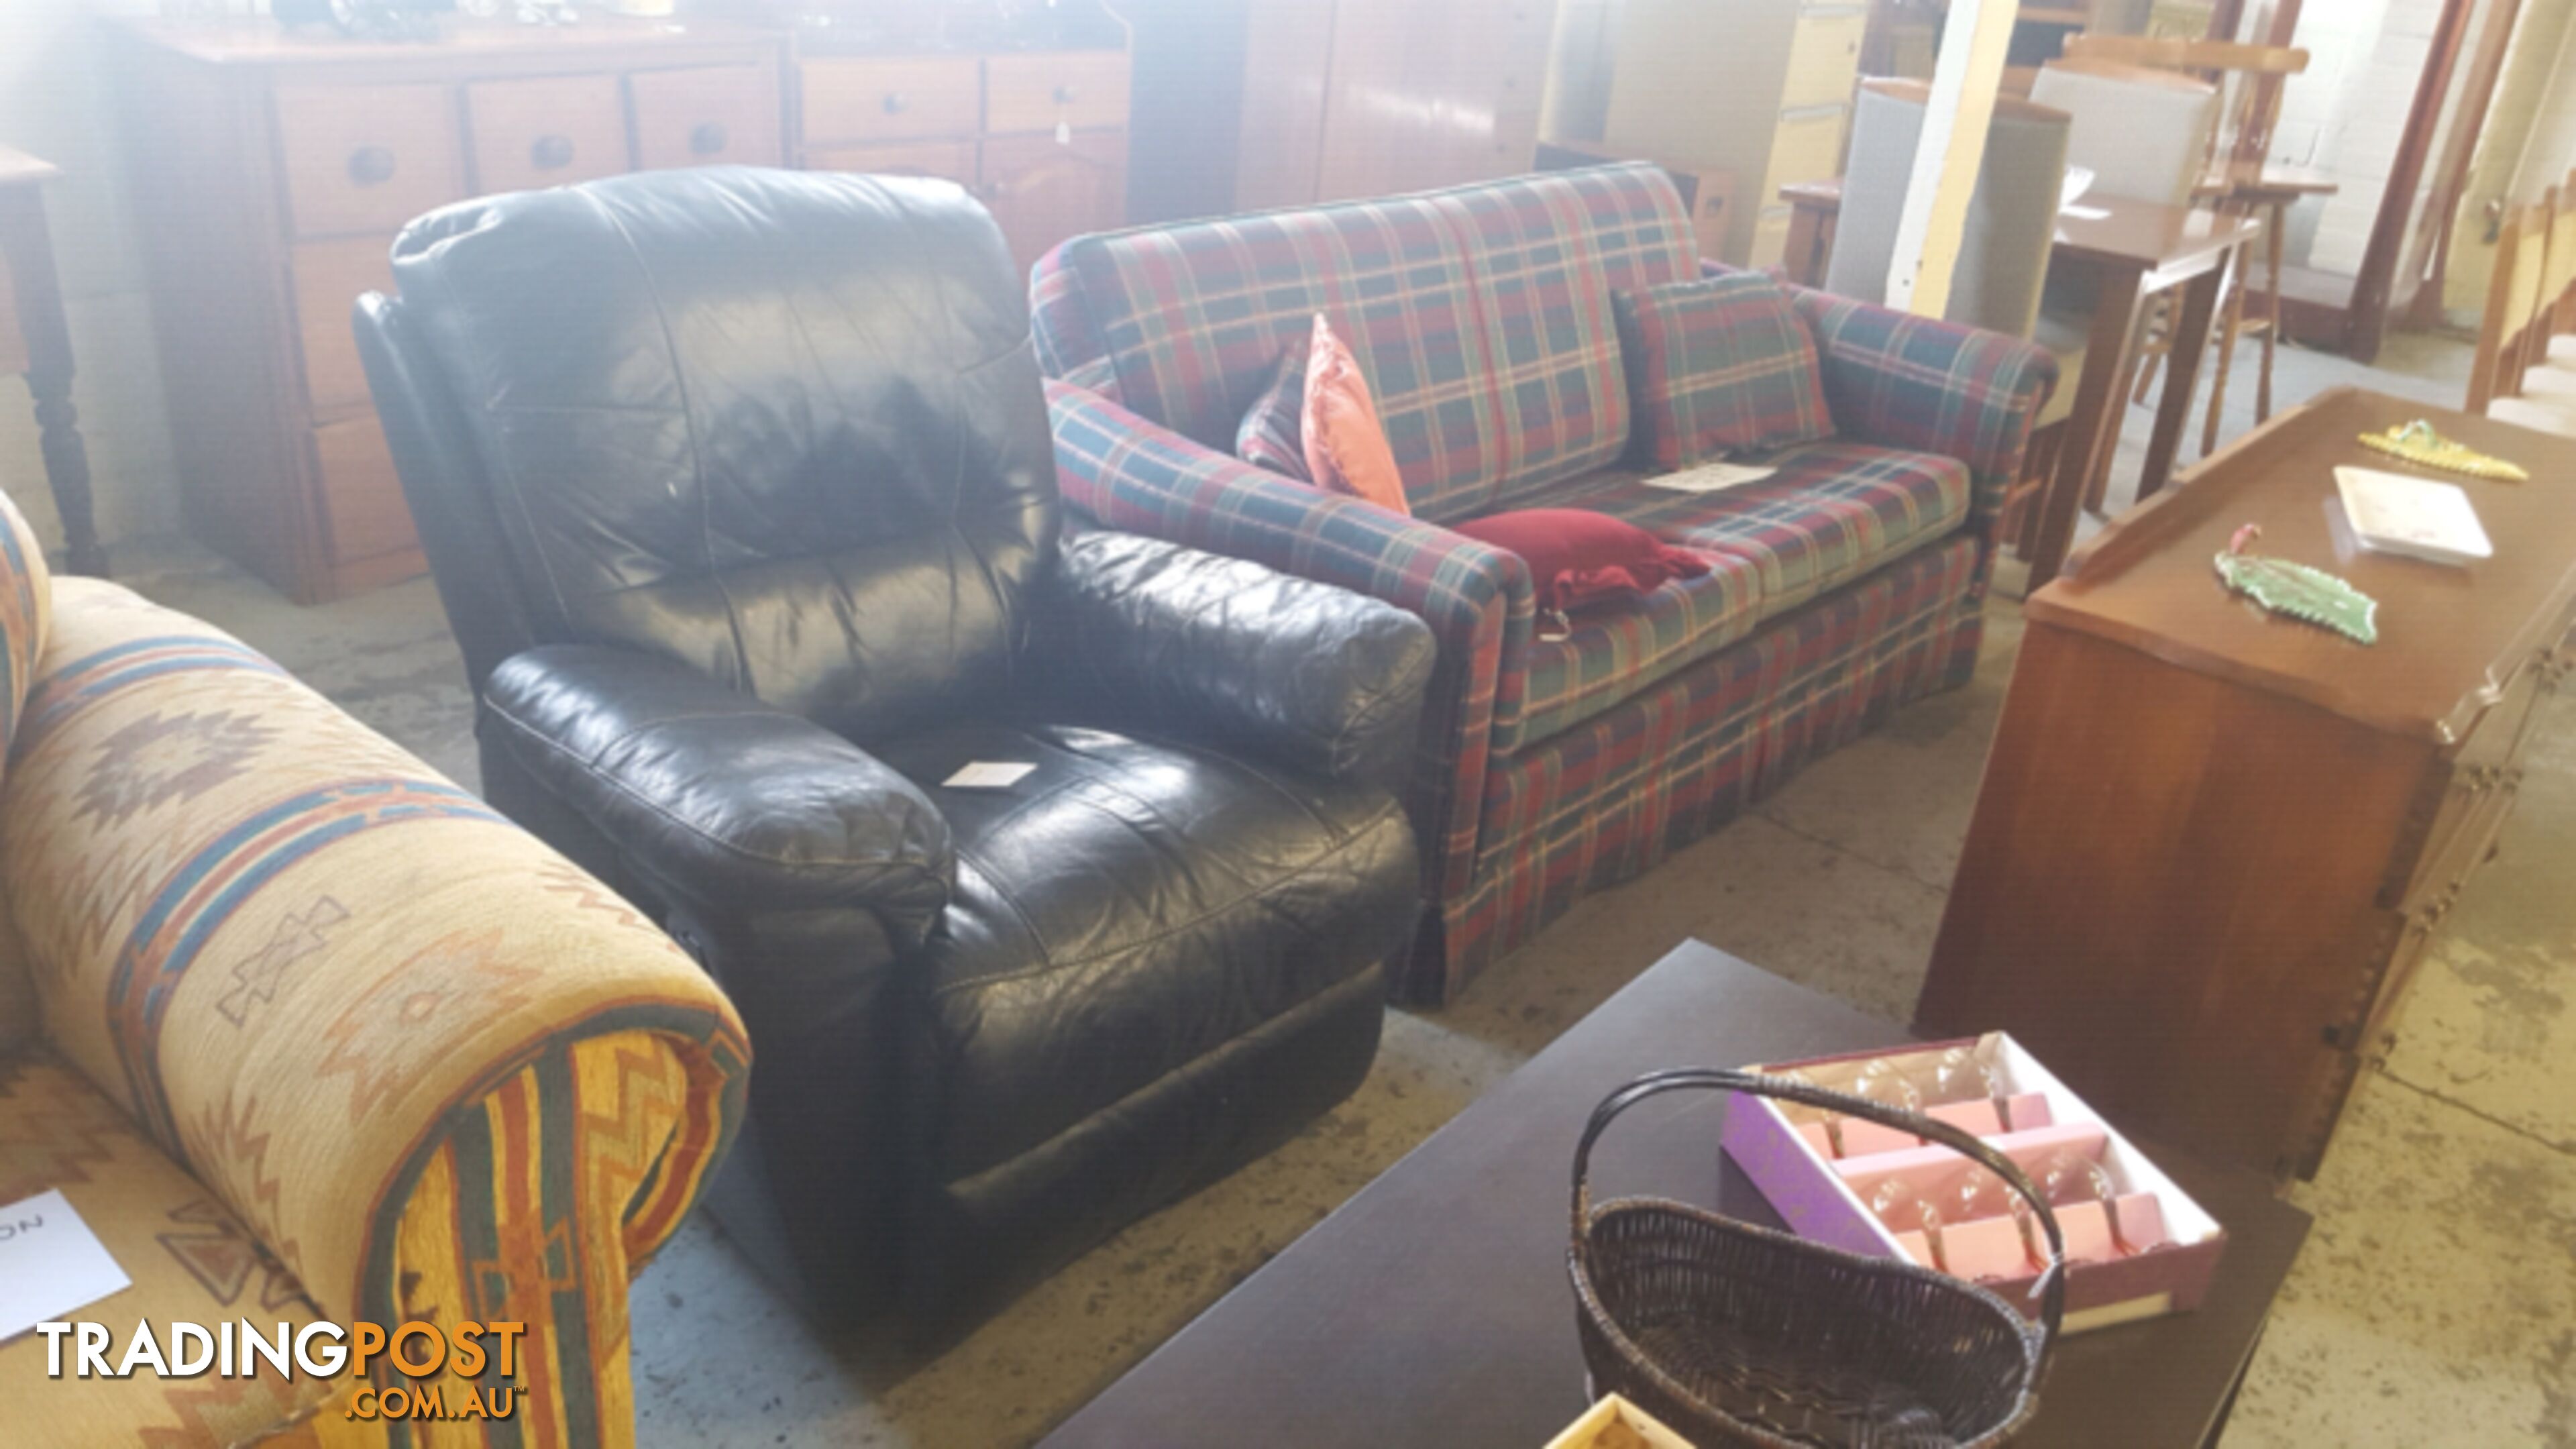 Furniture For Sale Sun 10am to 4pm